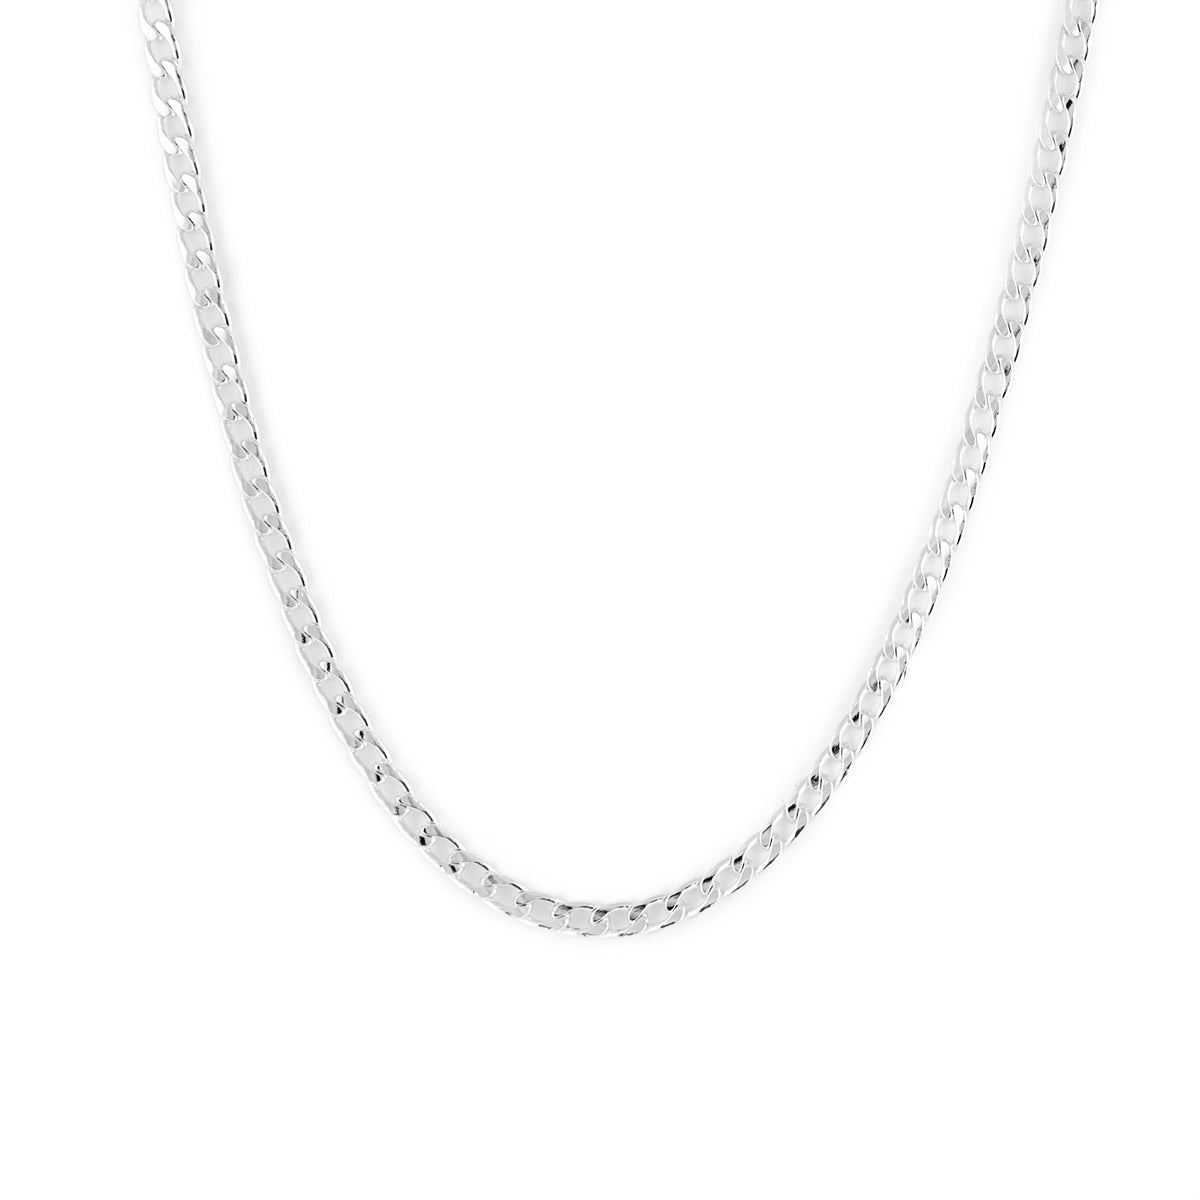 Runway Necklace - White Silver